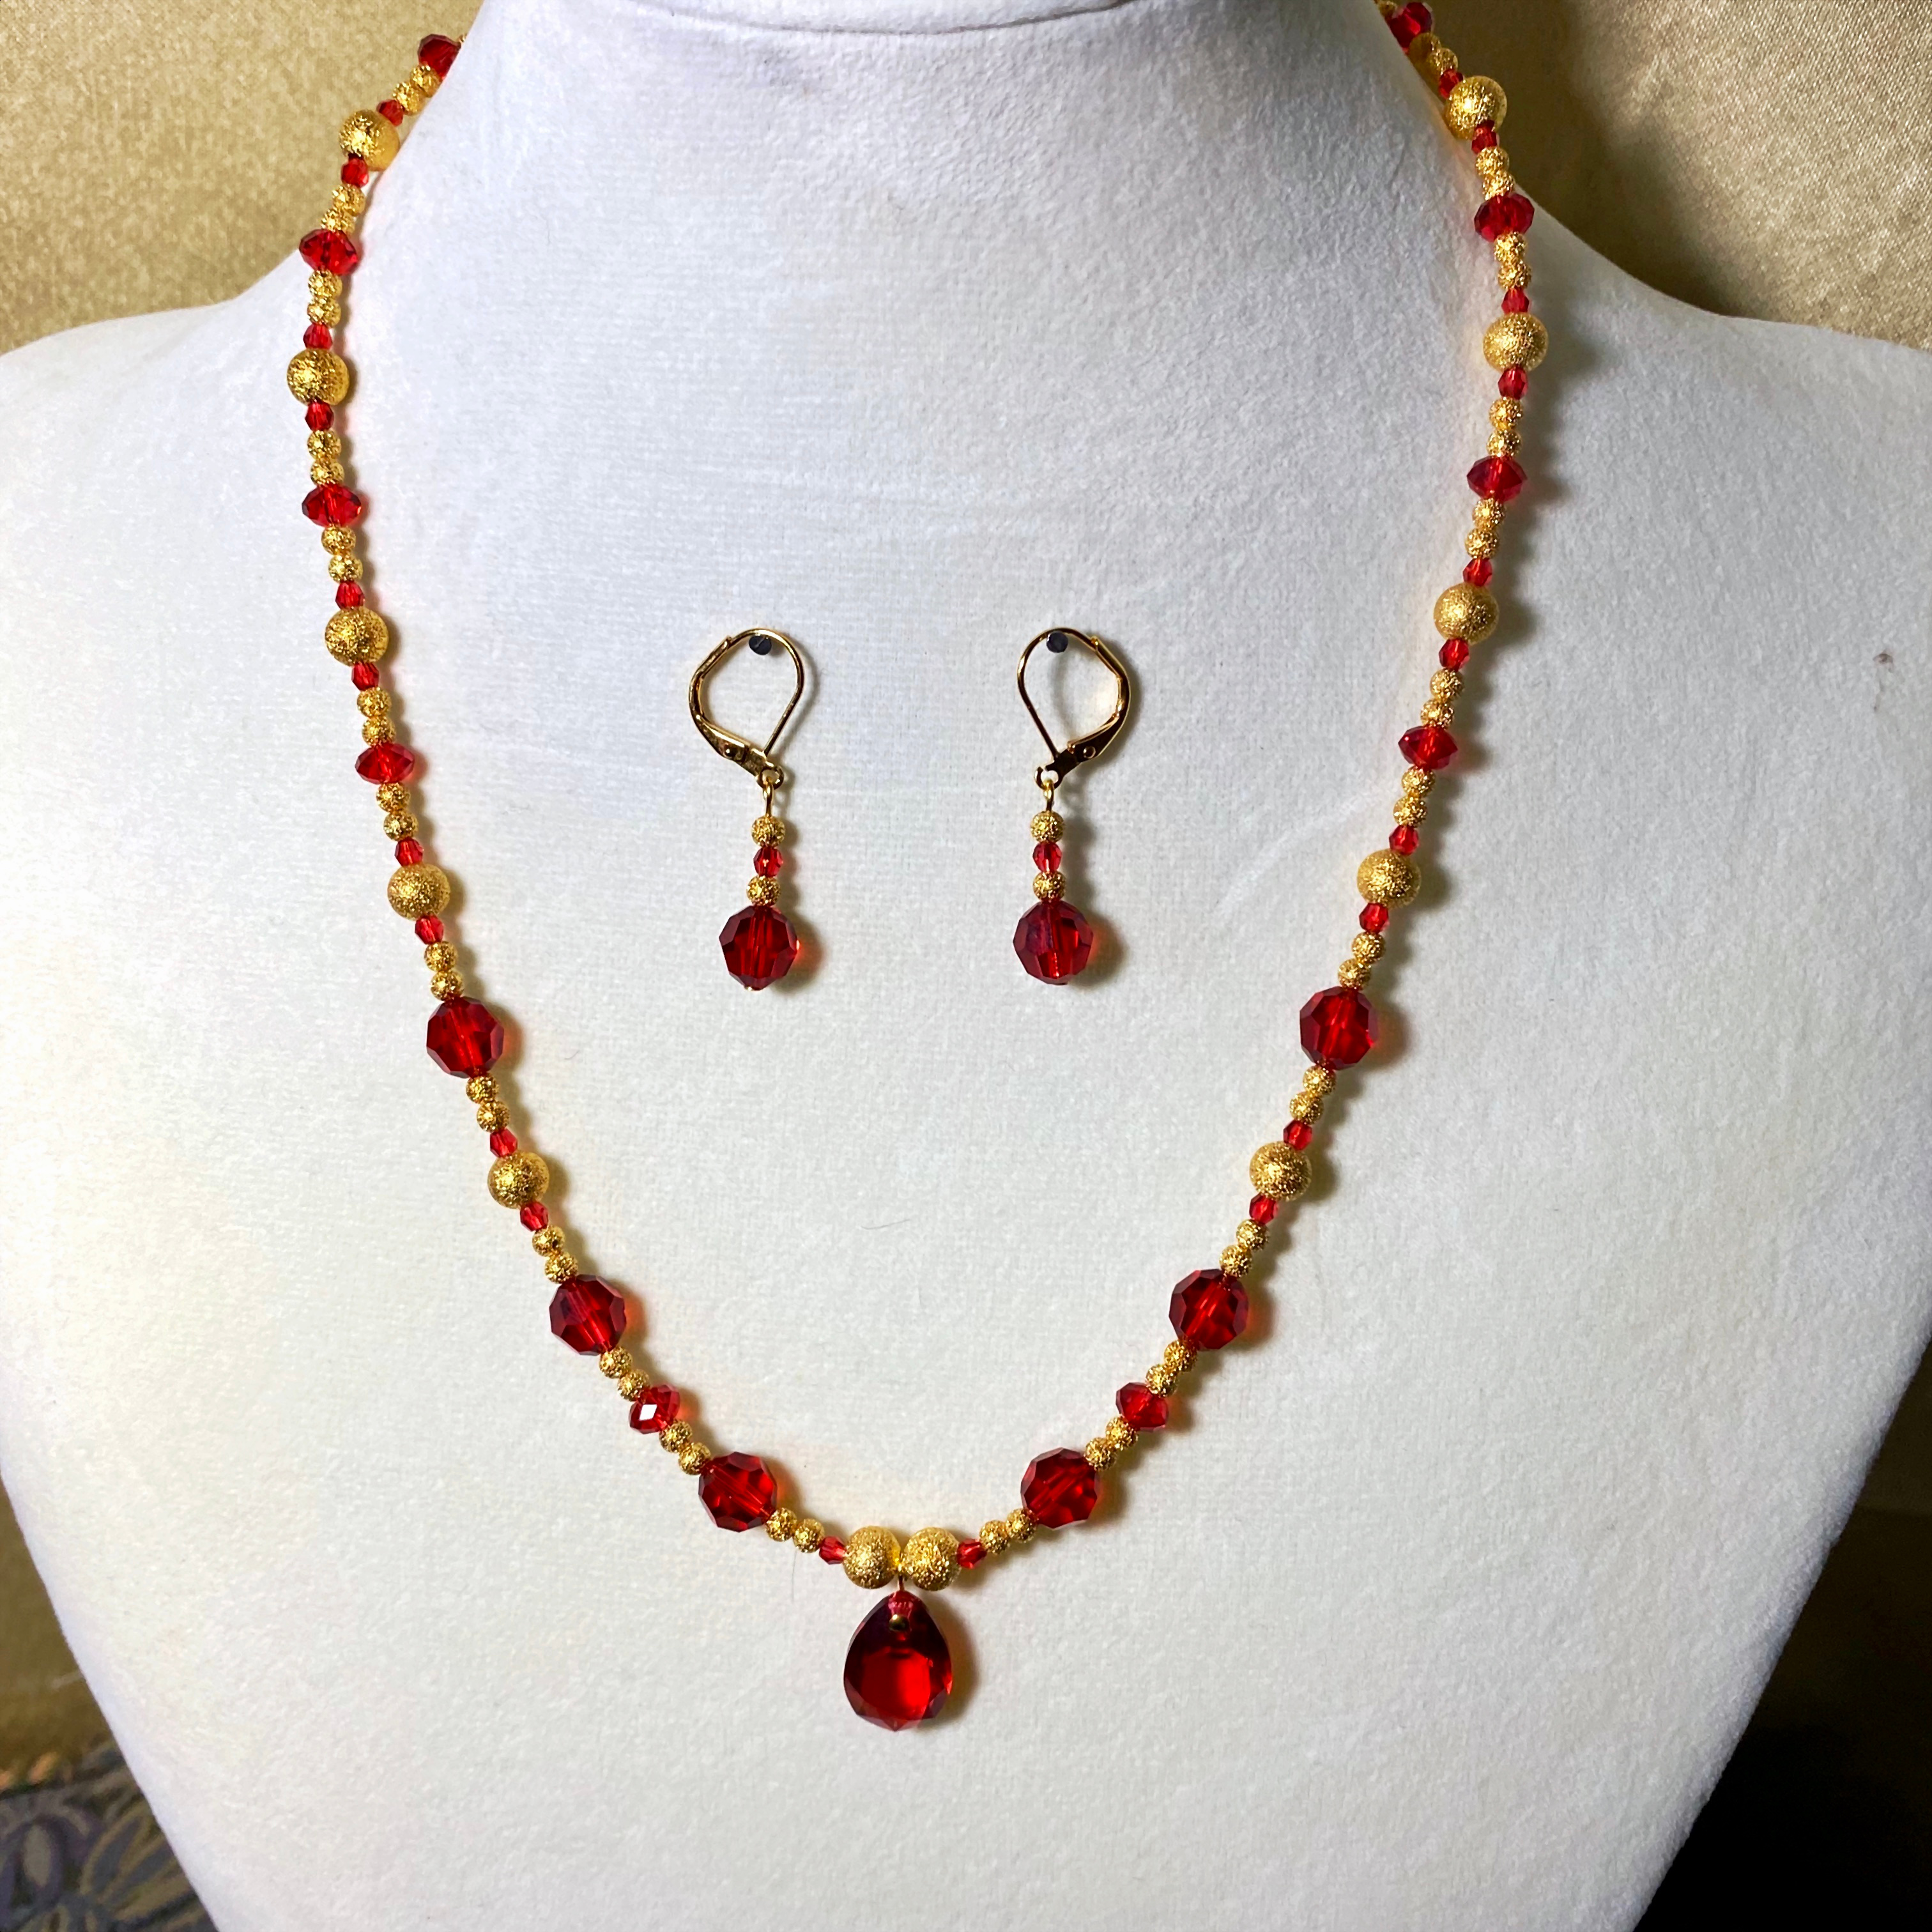 Picture of Red and Gold Necklace with Pendant and Earrings